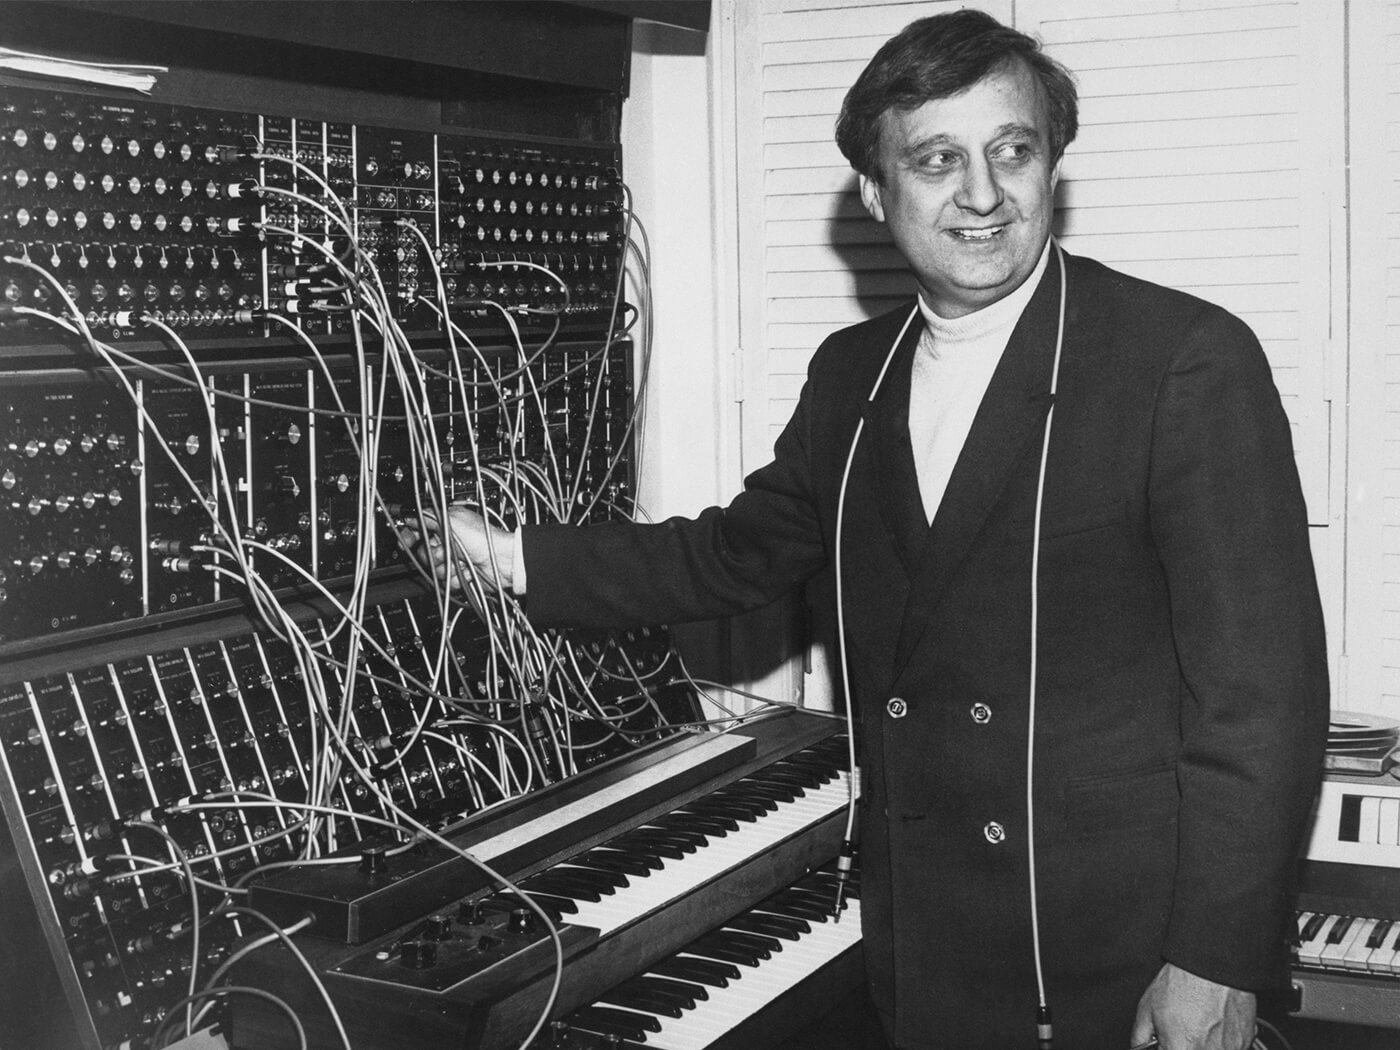 Gershon Kingsley with a Moog modular synthesizer